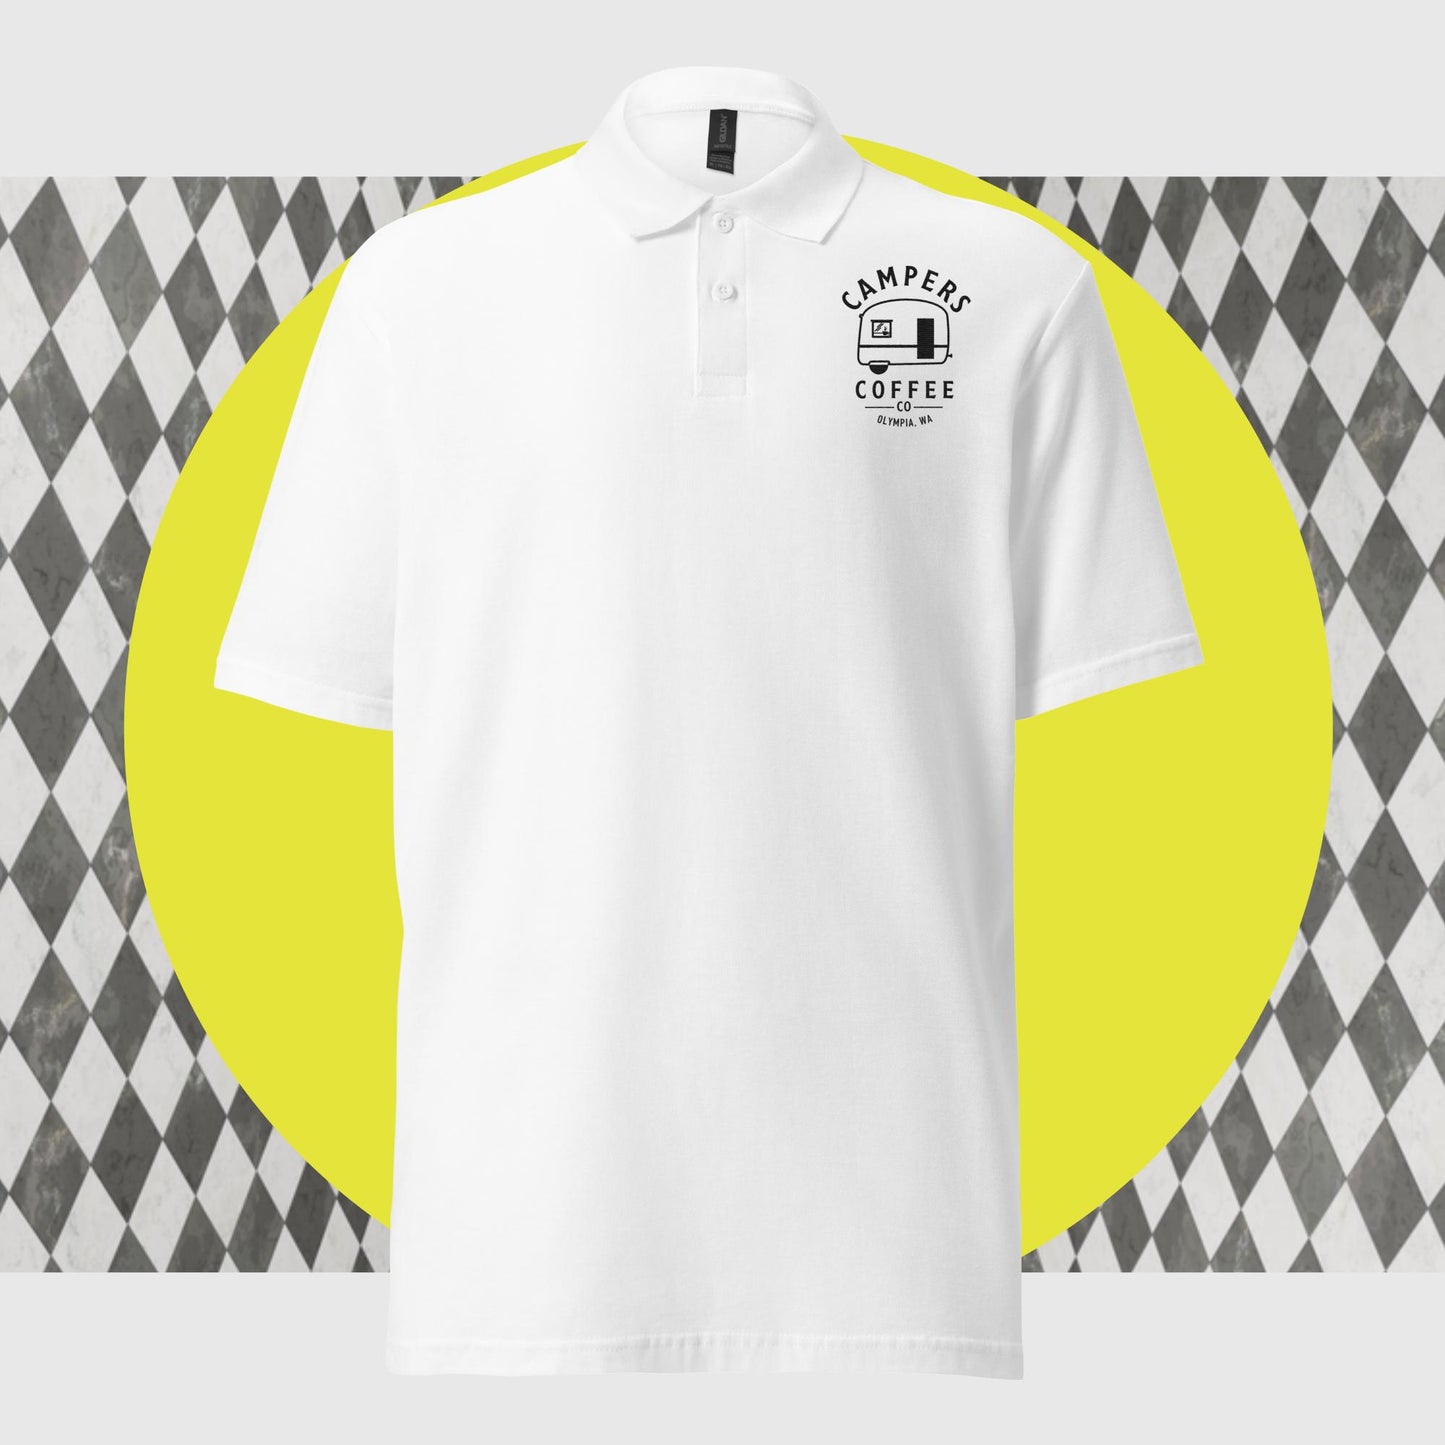 Campers coffee polo shirt